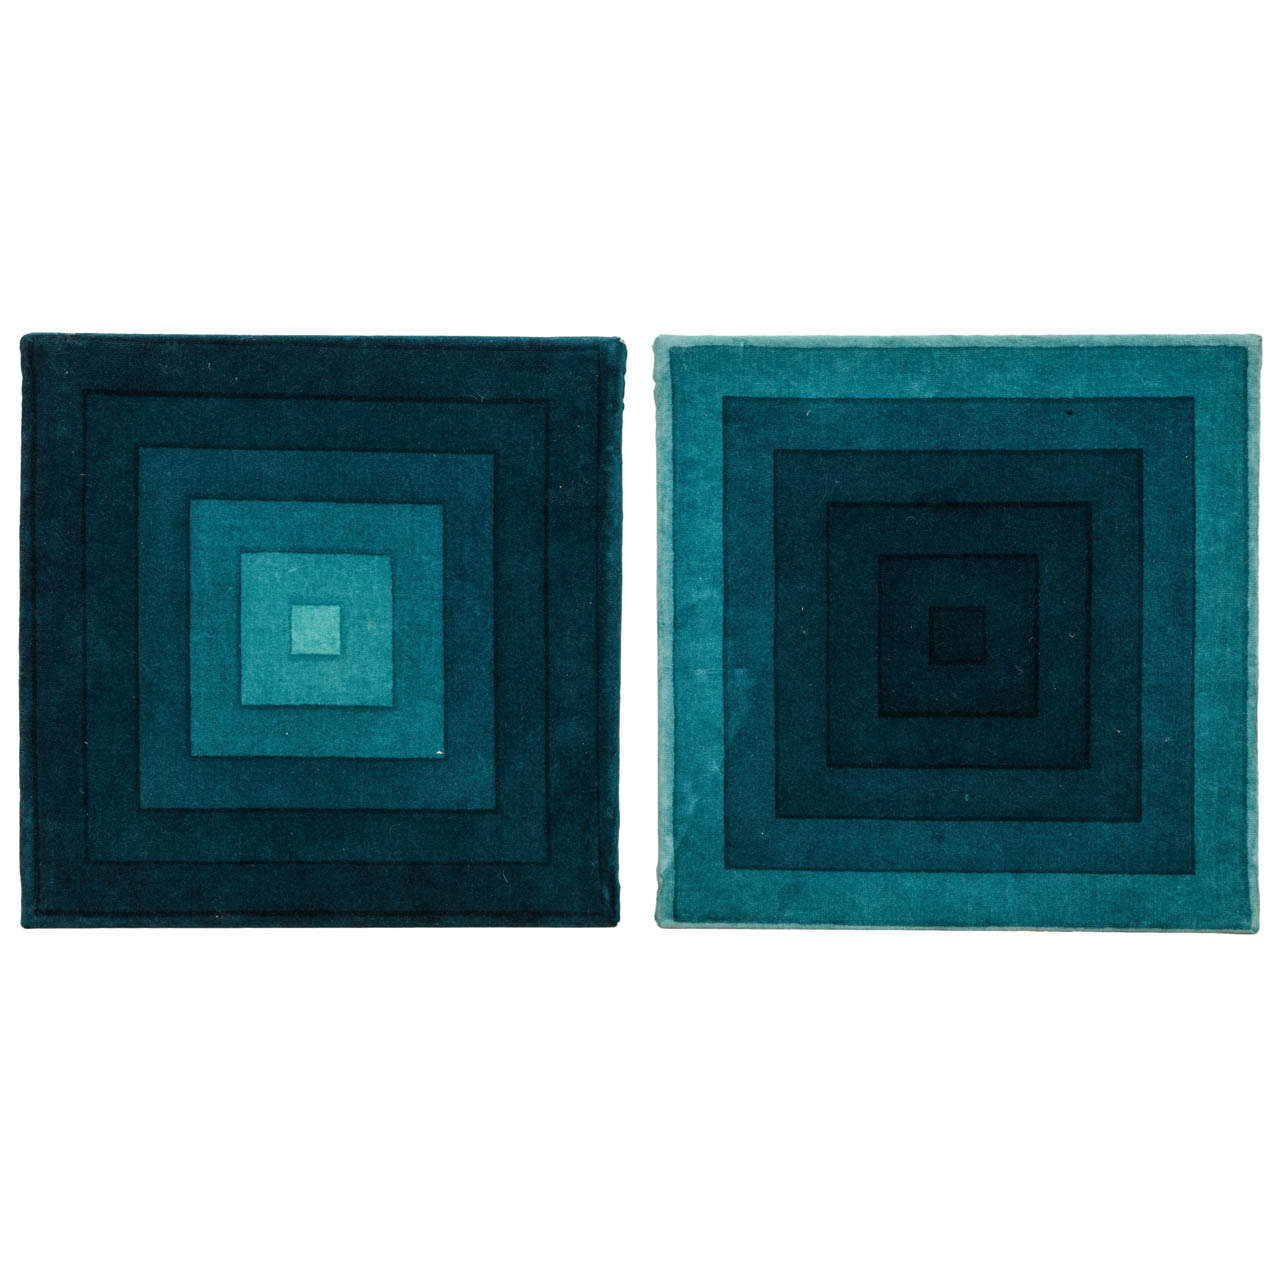 A Pair of Cotton Velvet 'Square' Hangings by Verner Panton for Mira-X